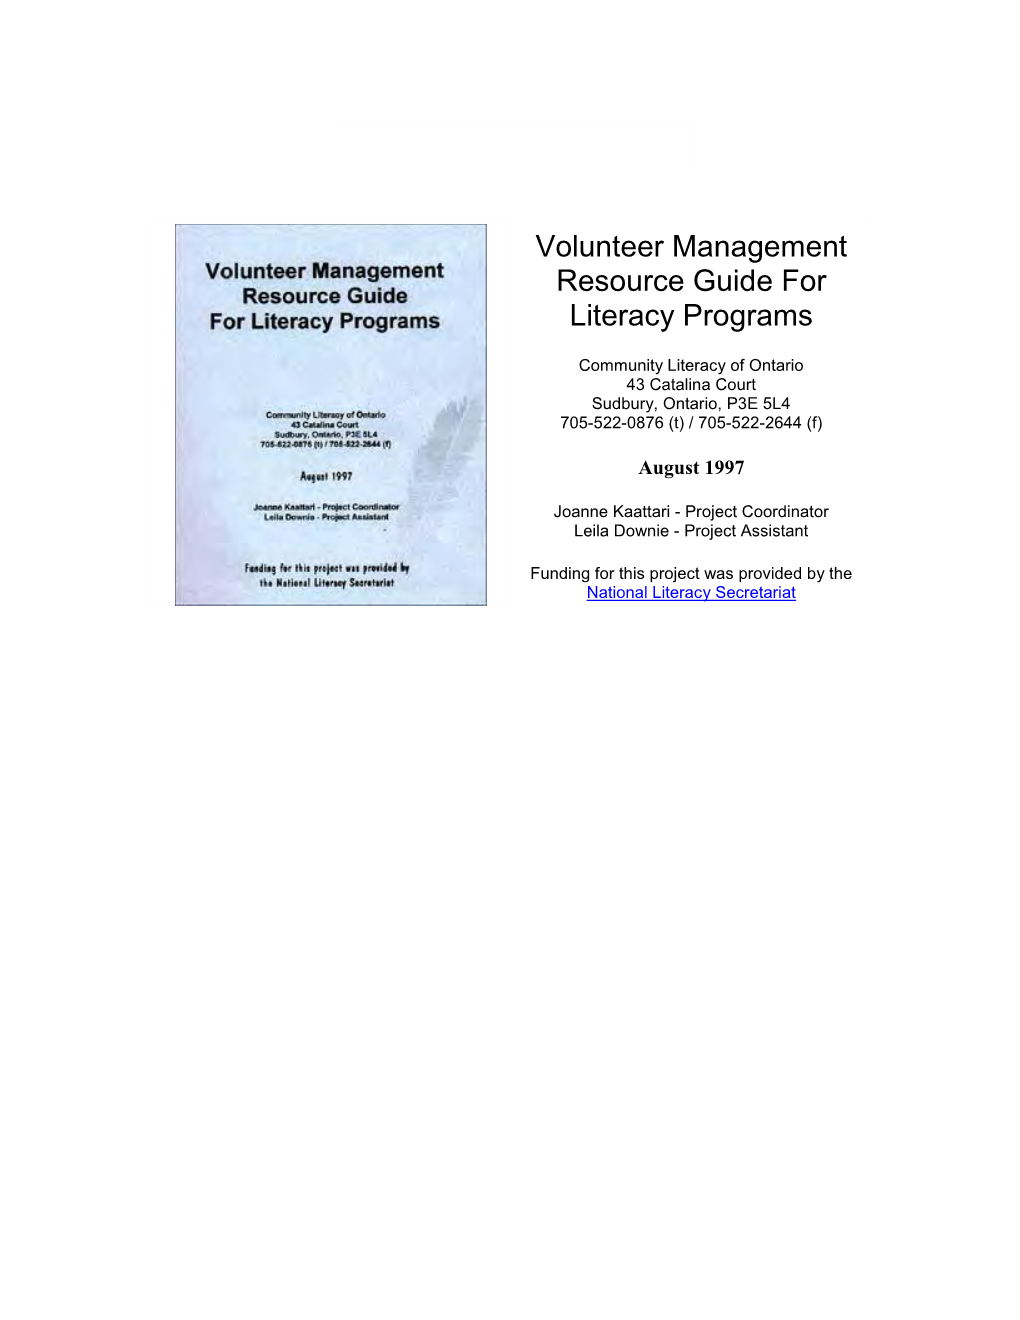 Volunteer Management Resource Guide for Literacy Programs